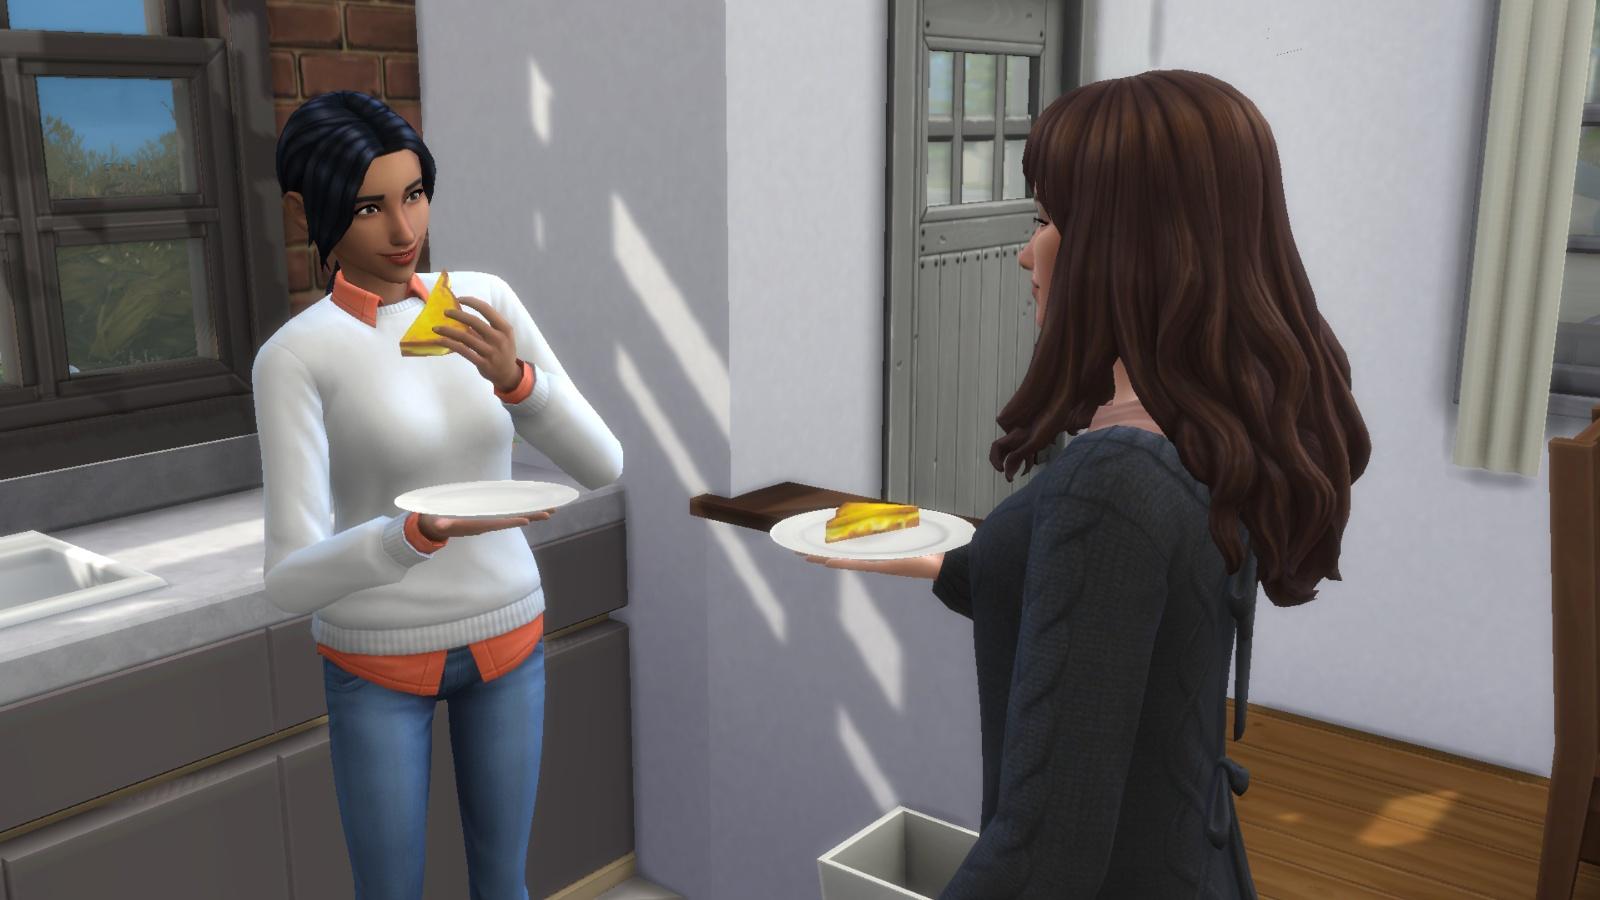 A screenshot featuring Sims eating Grilled Cheese in The Sims 4.